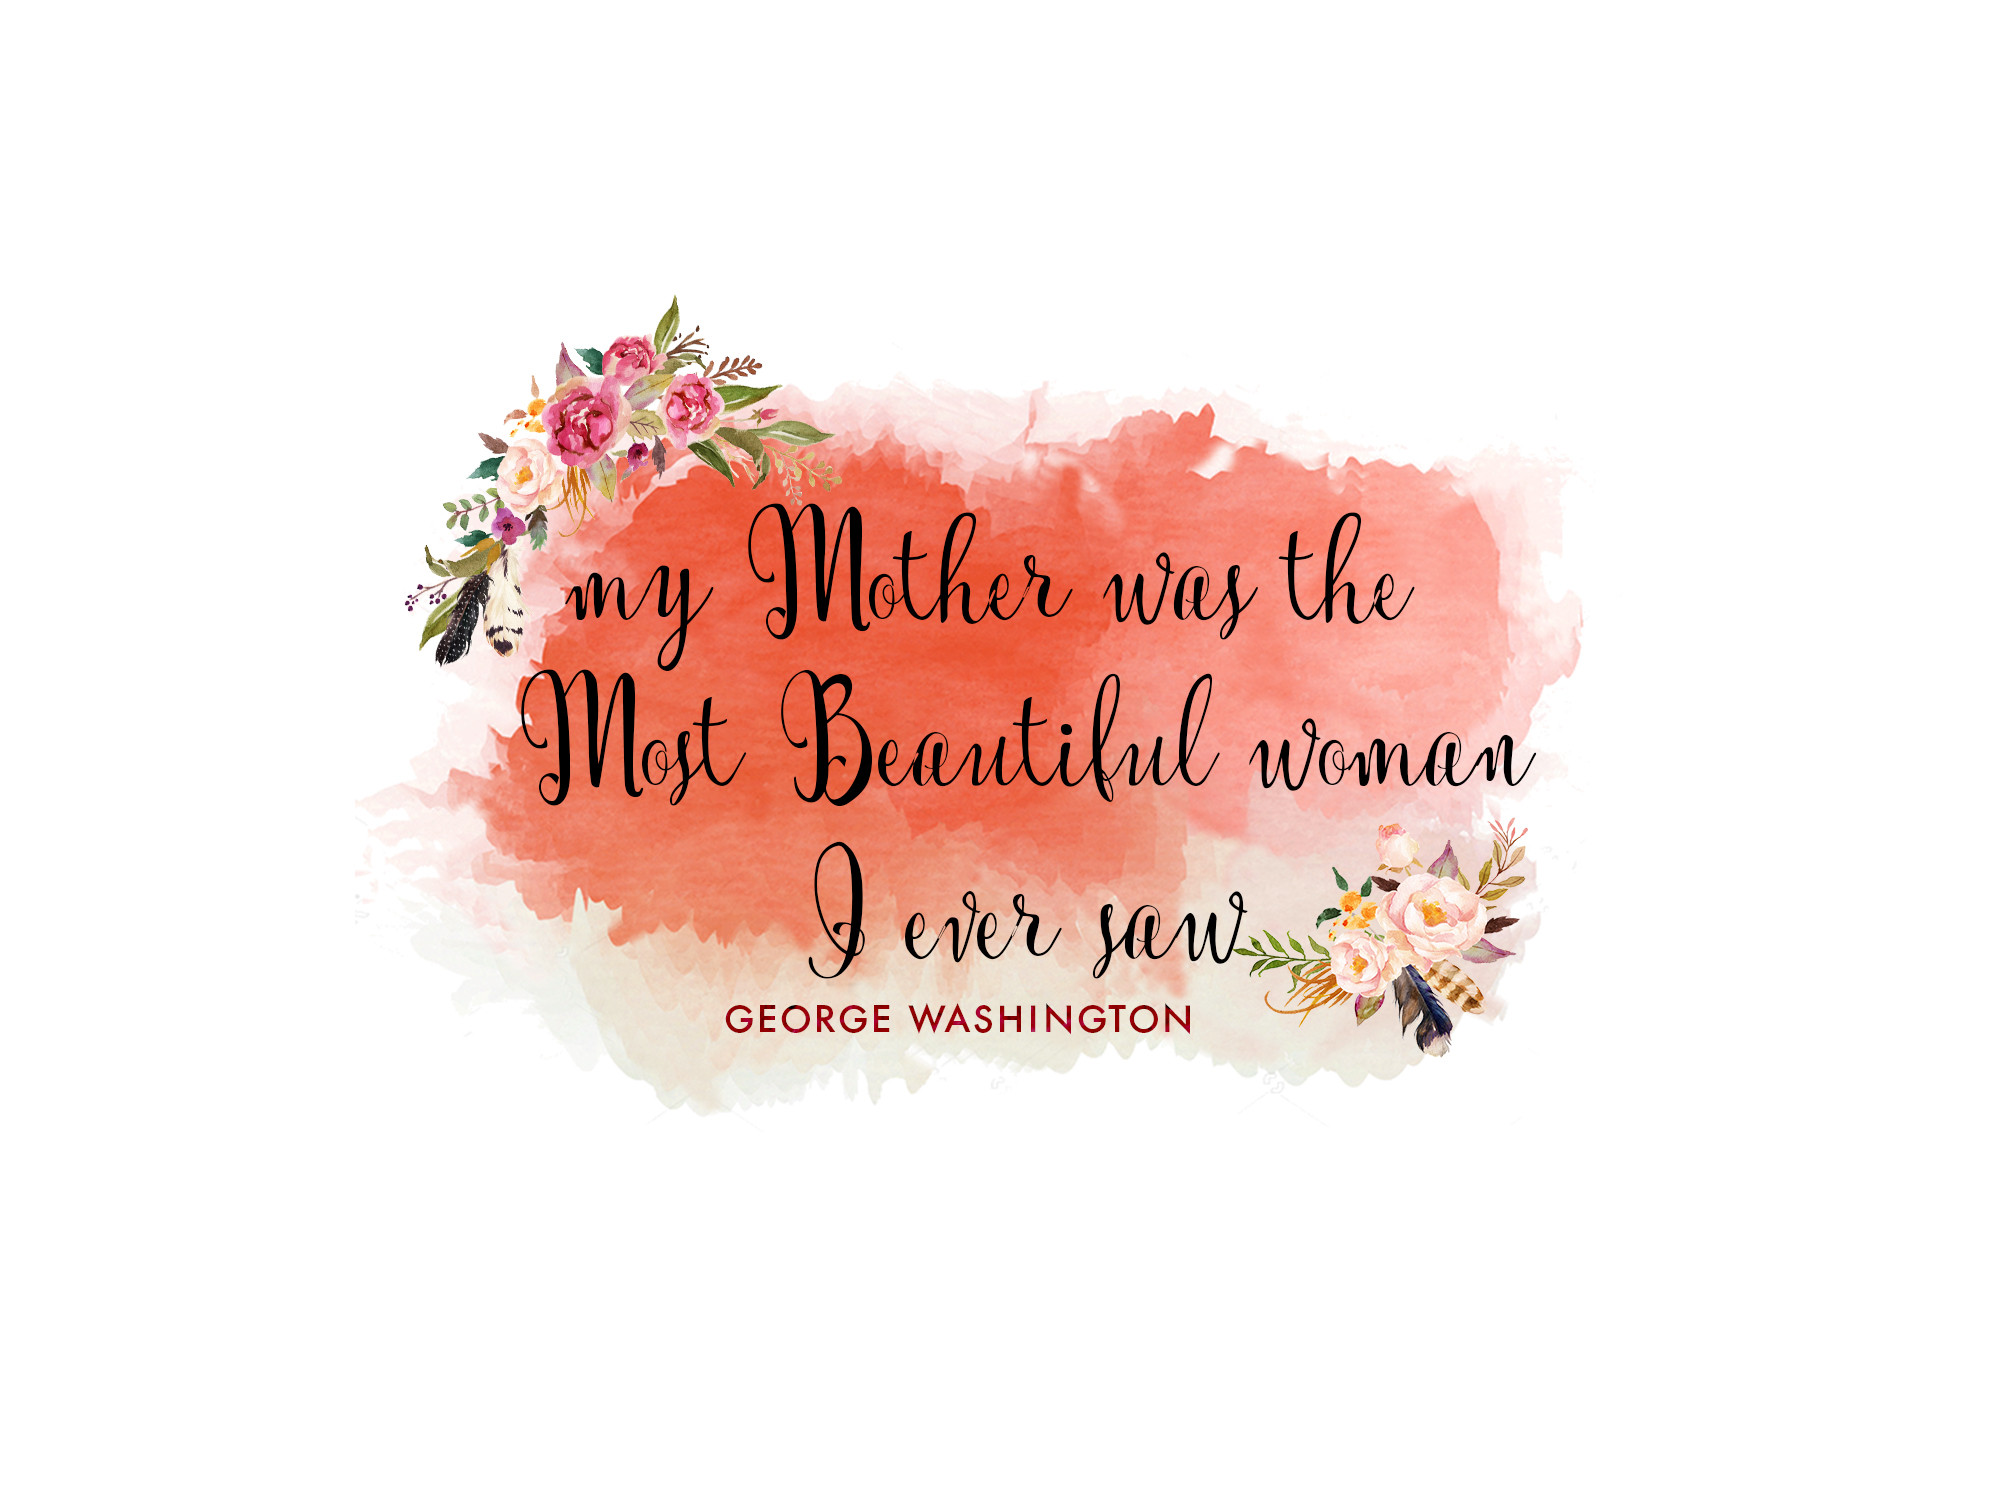 Mothers Day Quotes For Mother In Laws
 Mother s Day Quotes Slogans Quotations & Sayings 2019